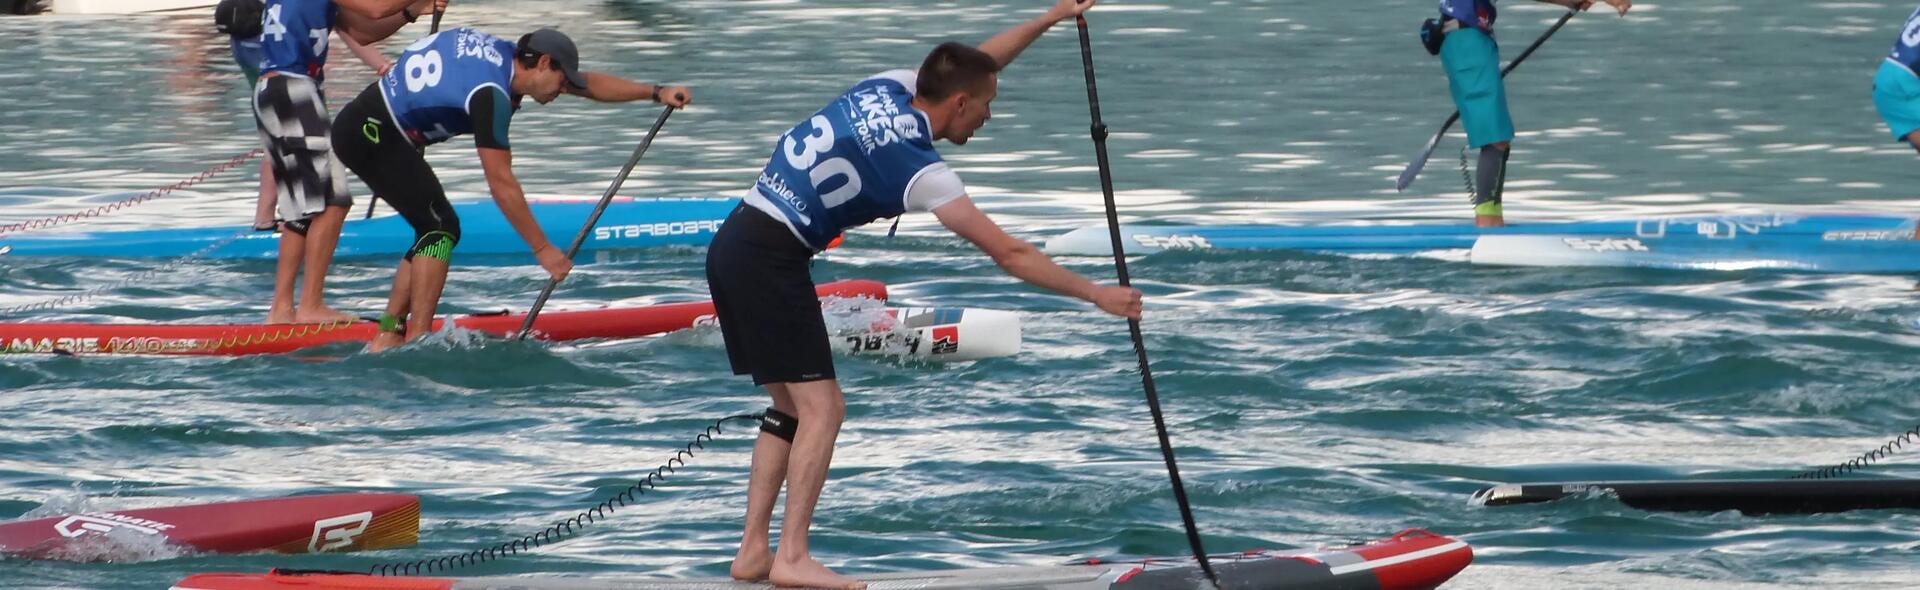 Annecy Fat Race inflatable sup